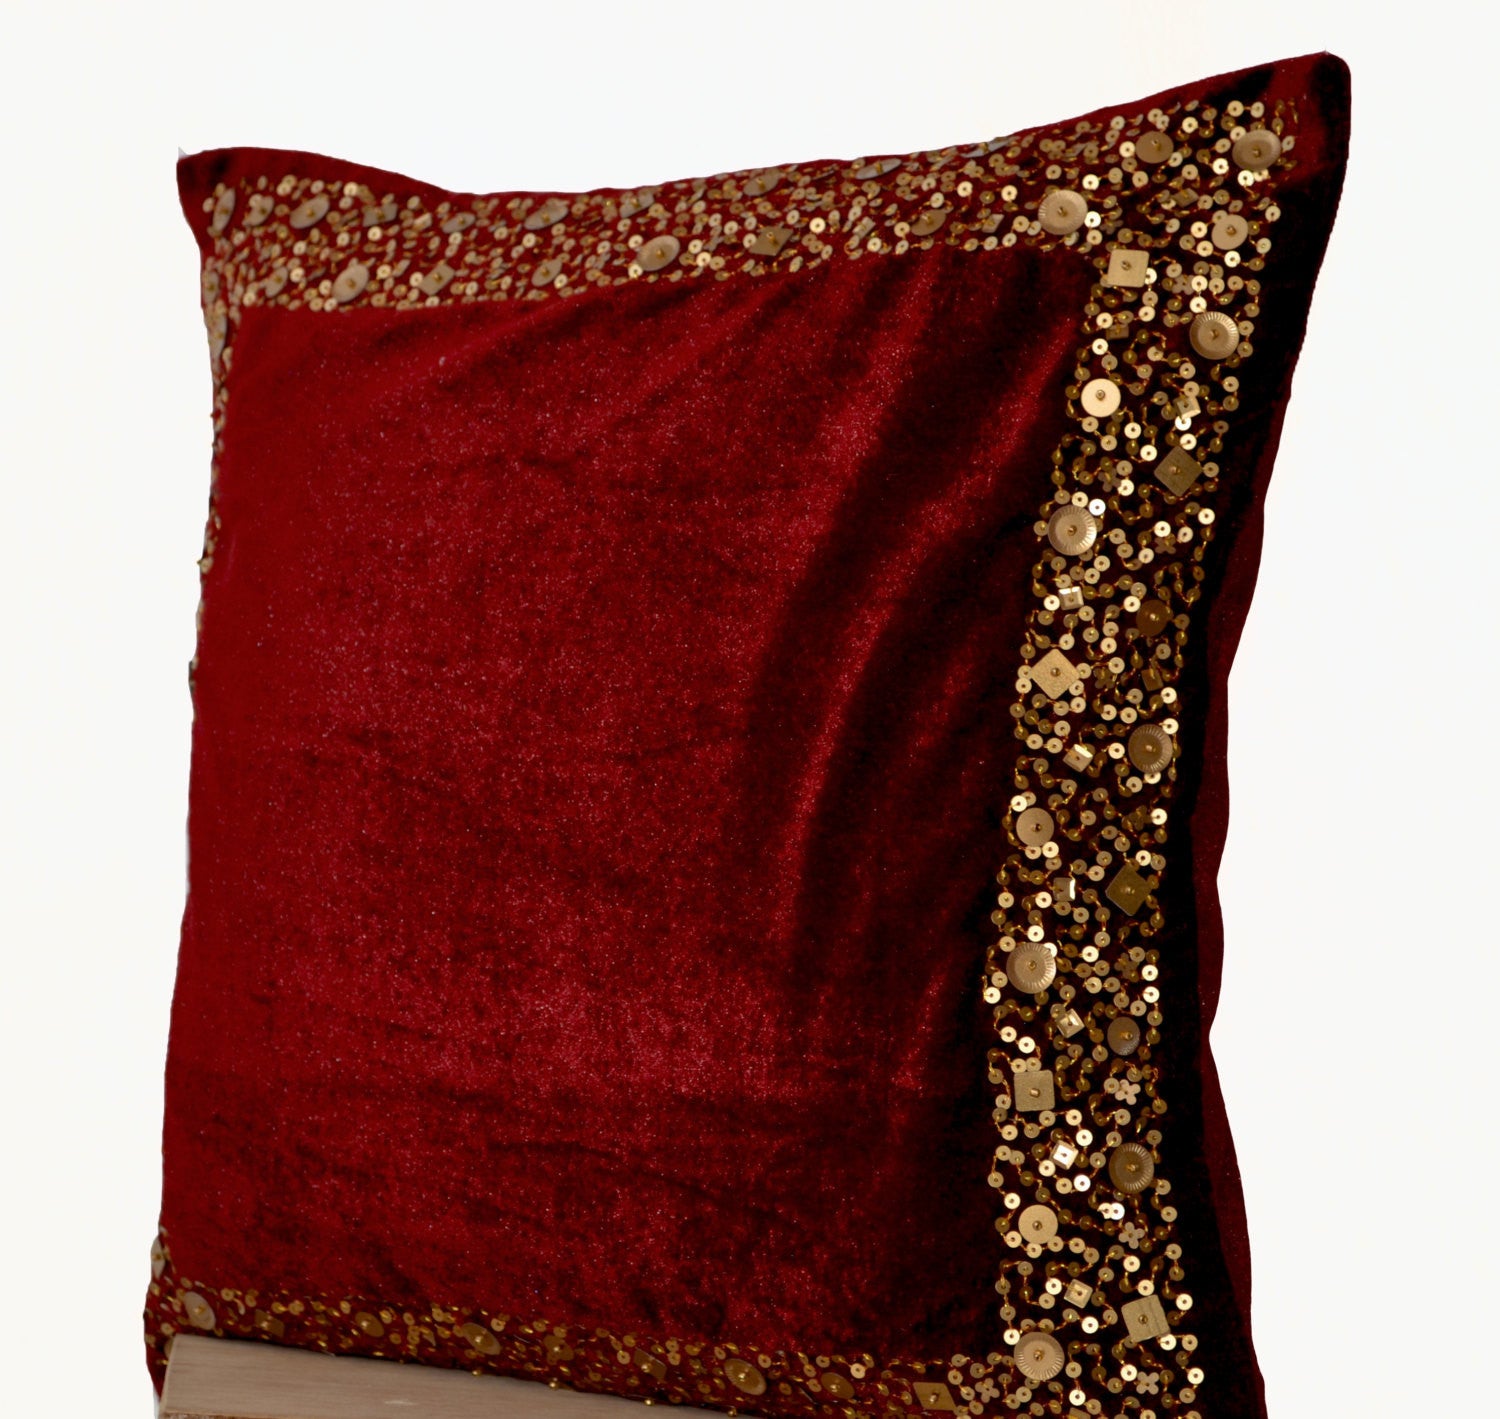 Handmade maroon velvet throw pillows with gold sequin border and beads